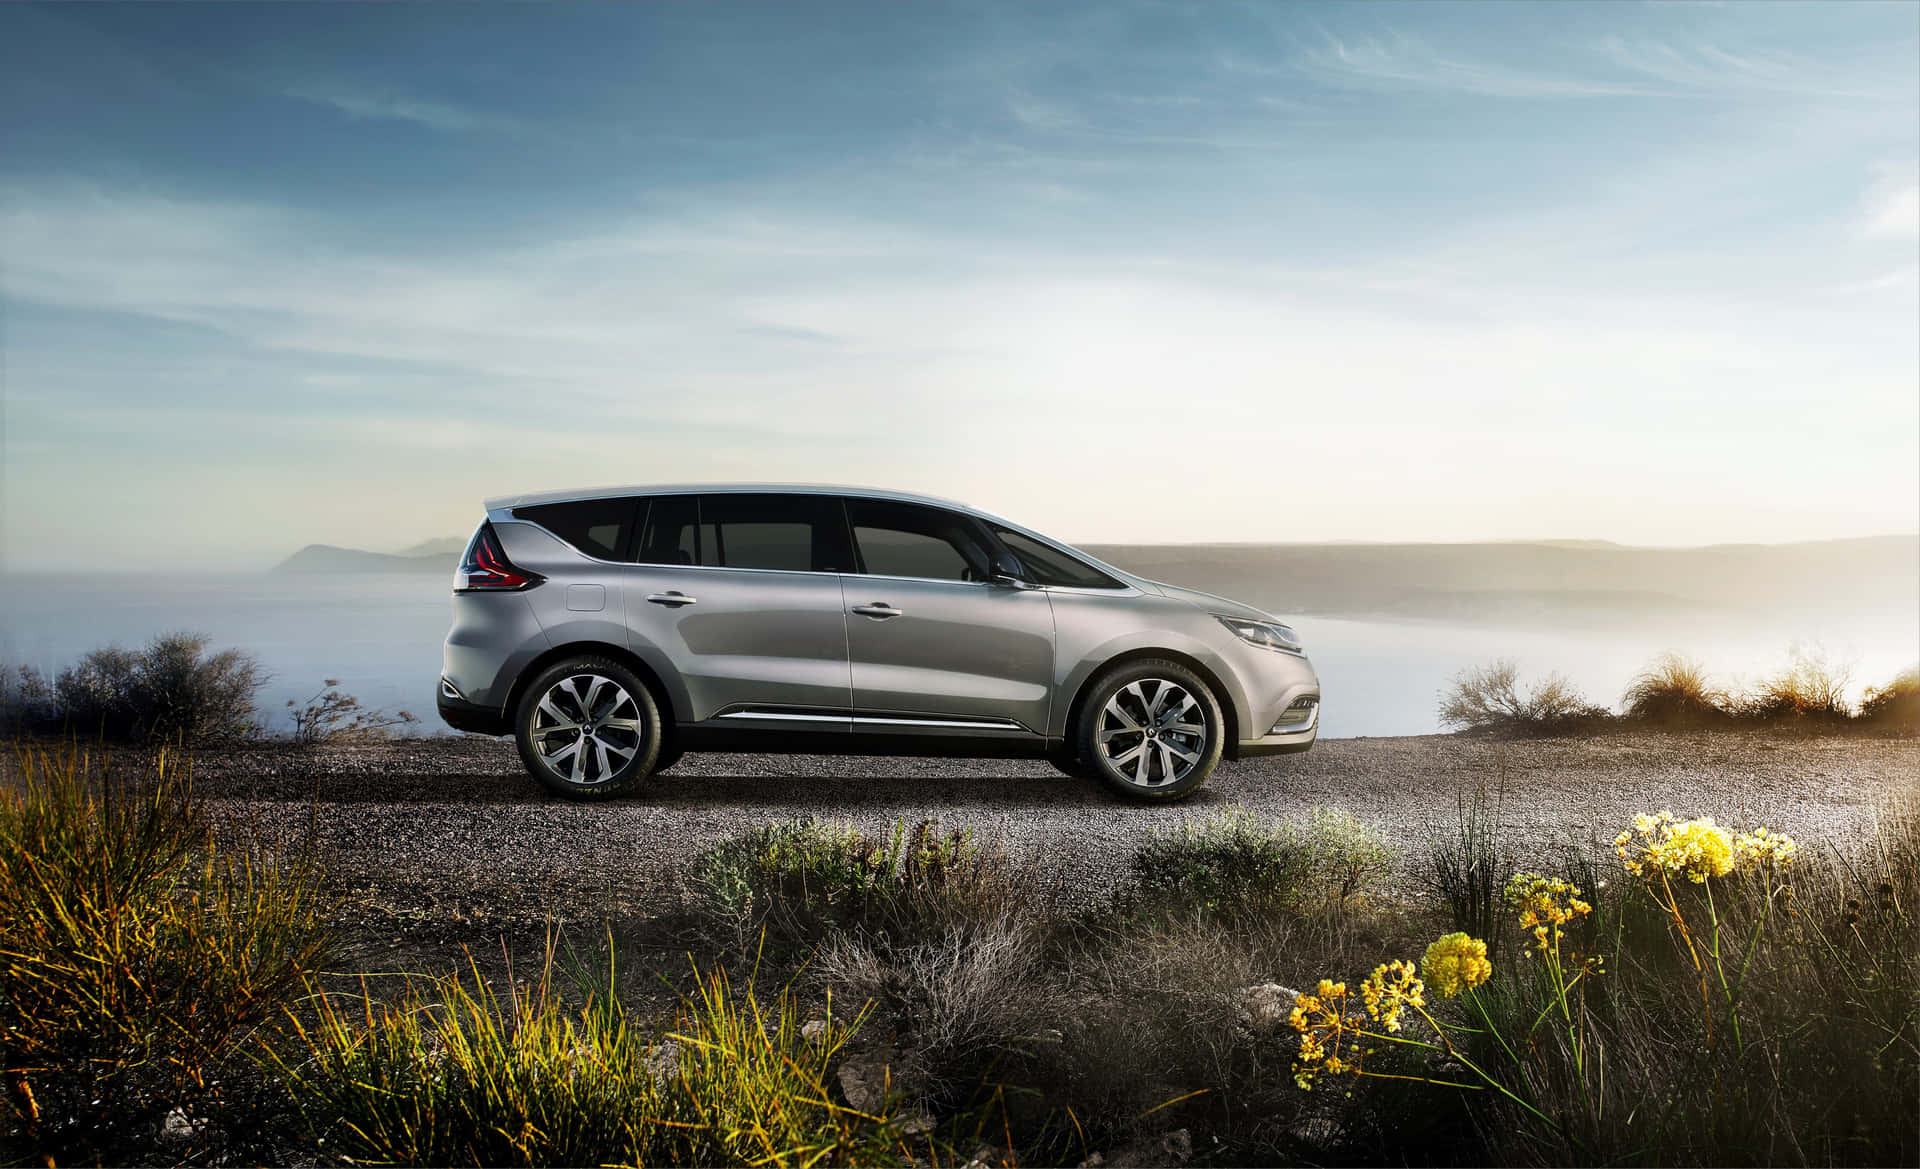 A Journey To Remember - Renault Espace On The Road Wallpaper